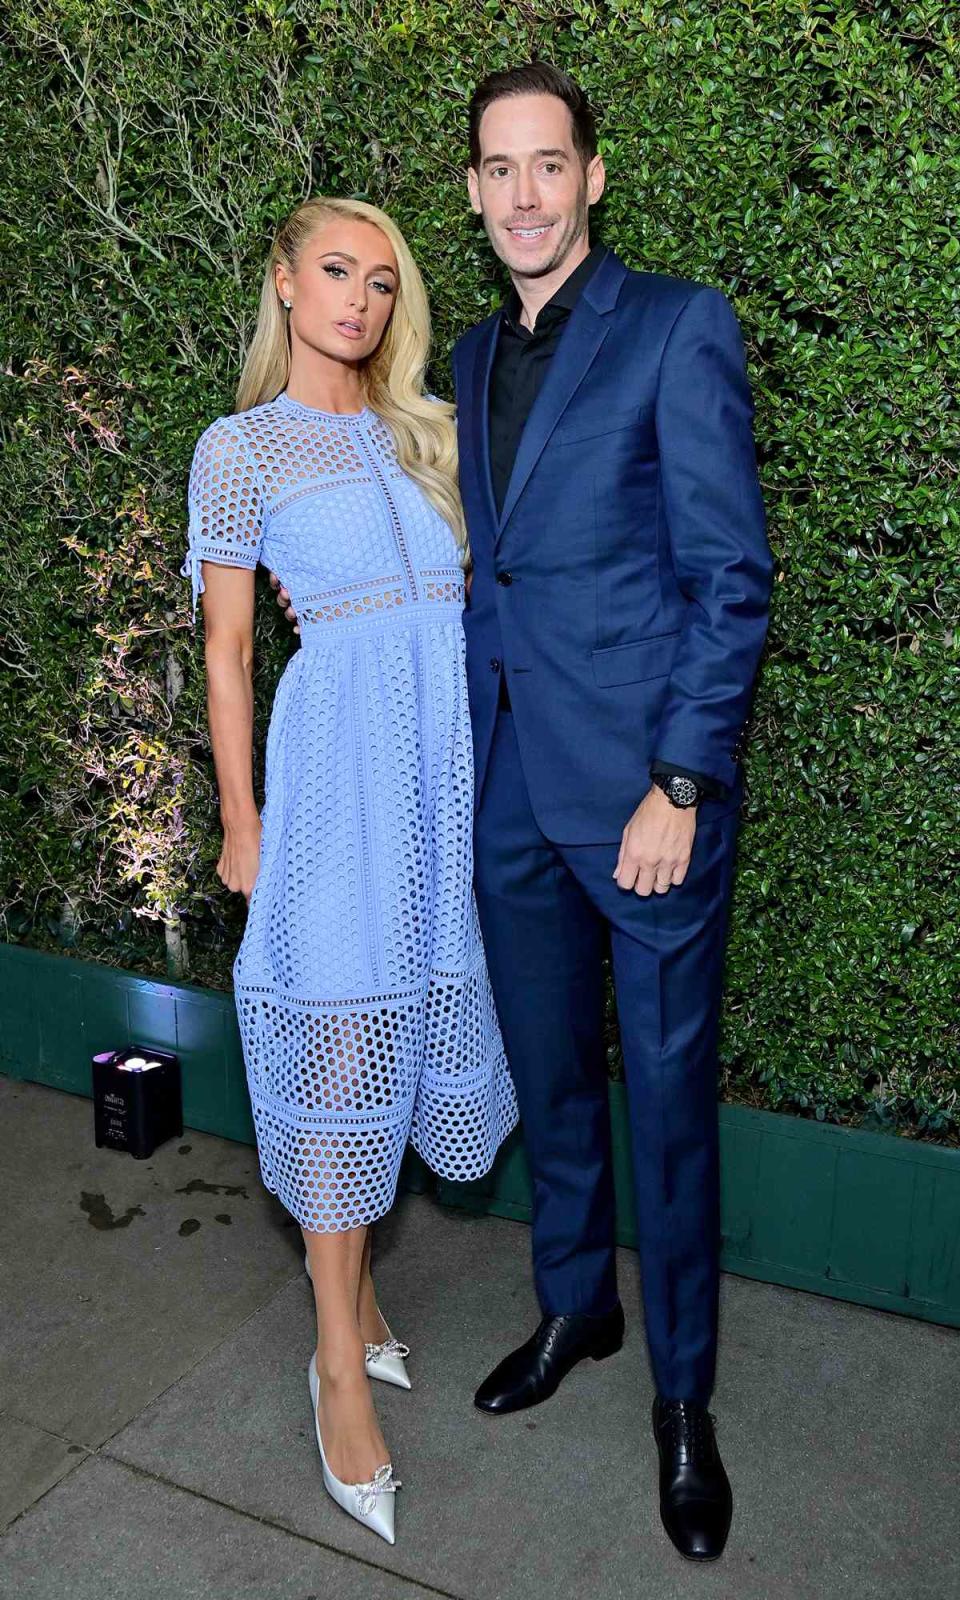 Paris Hilton and LACMA Trustee Carter Reum attend LACMA 2022 Collectors Committee Gala at Los Angeles County Museum of Art on April 23, 2022 in Los Angeles, California